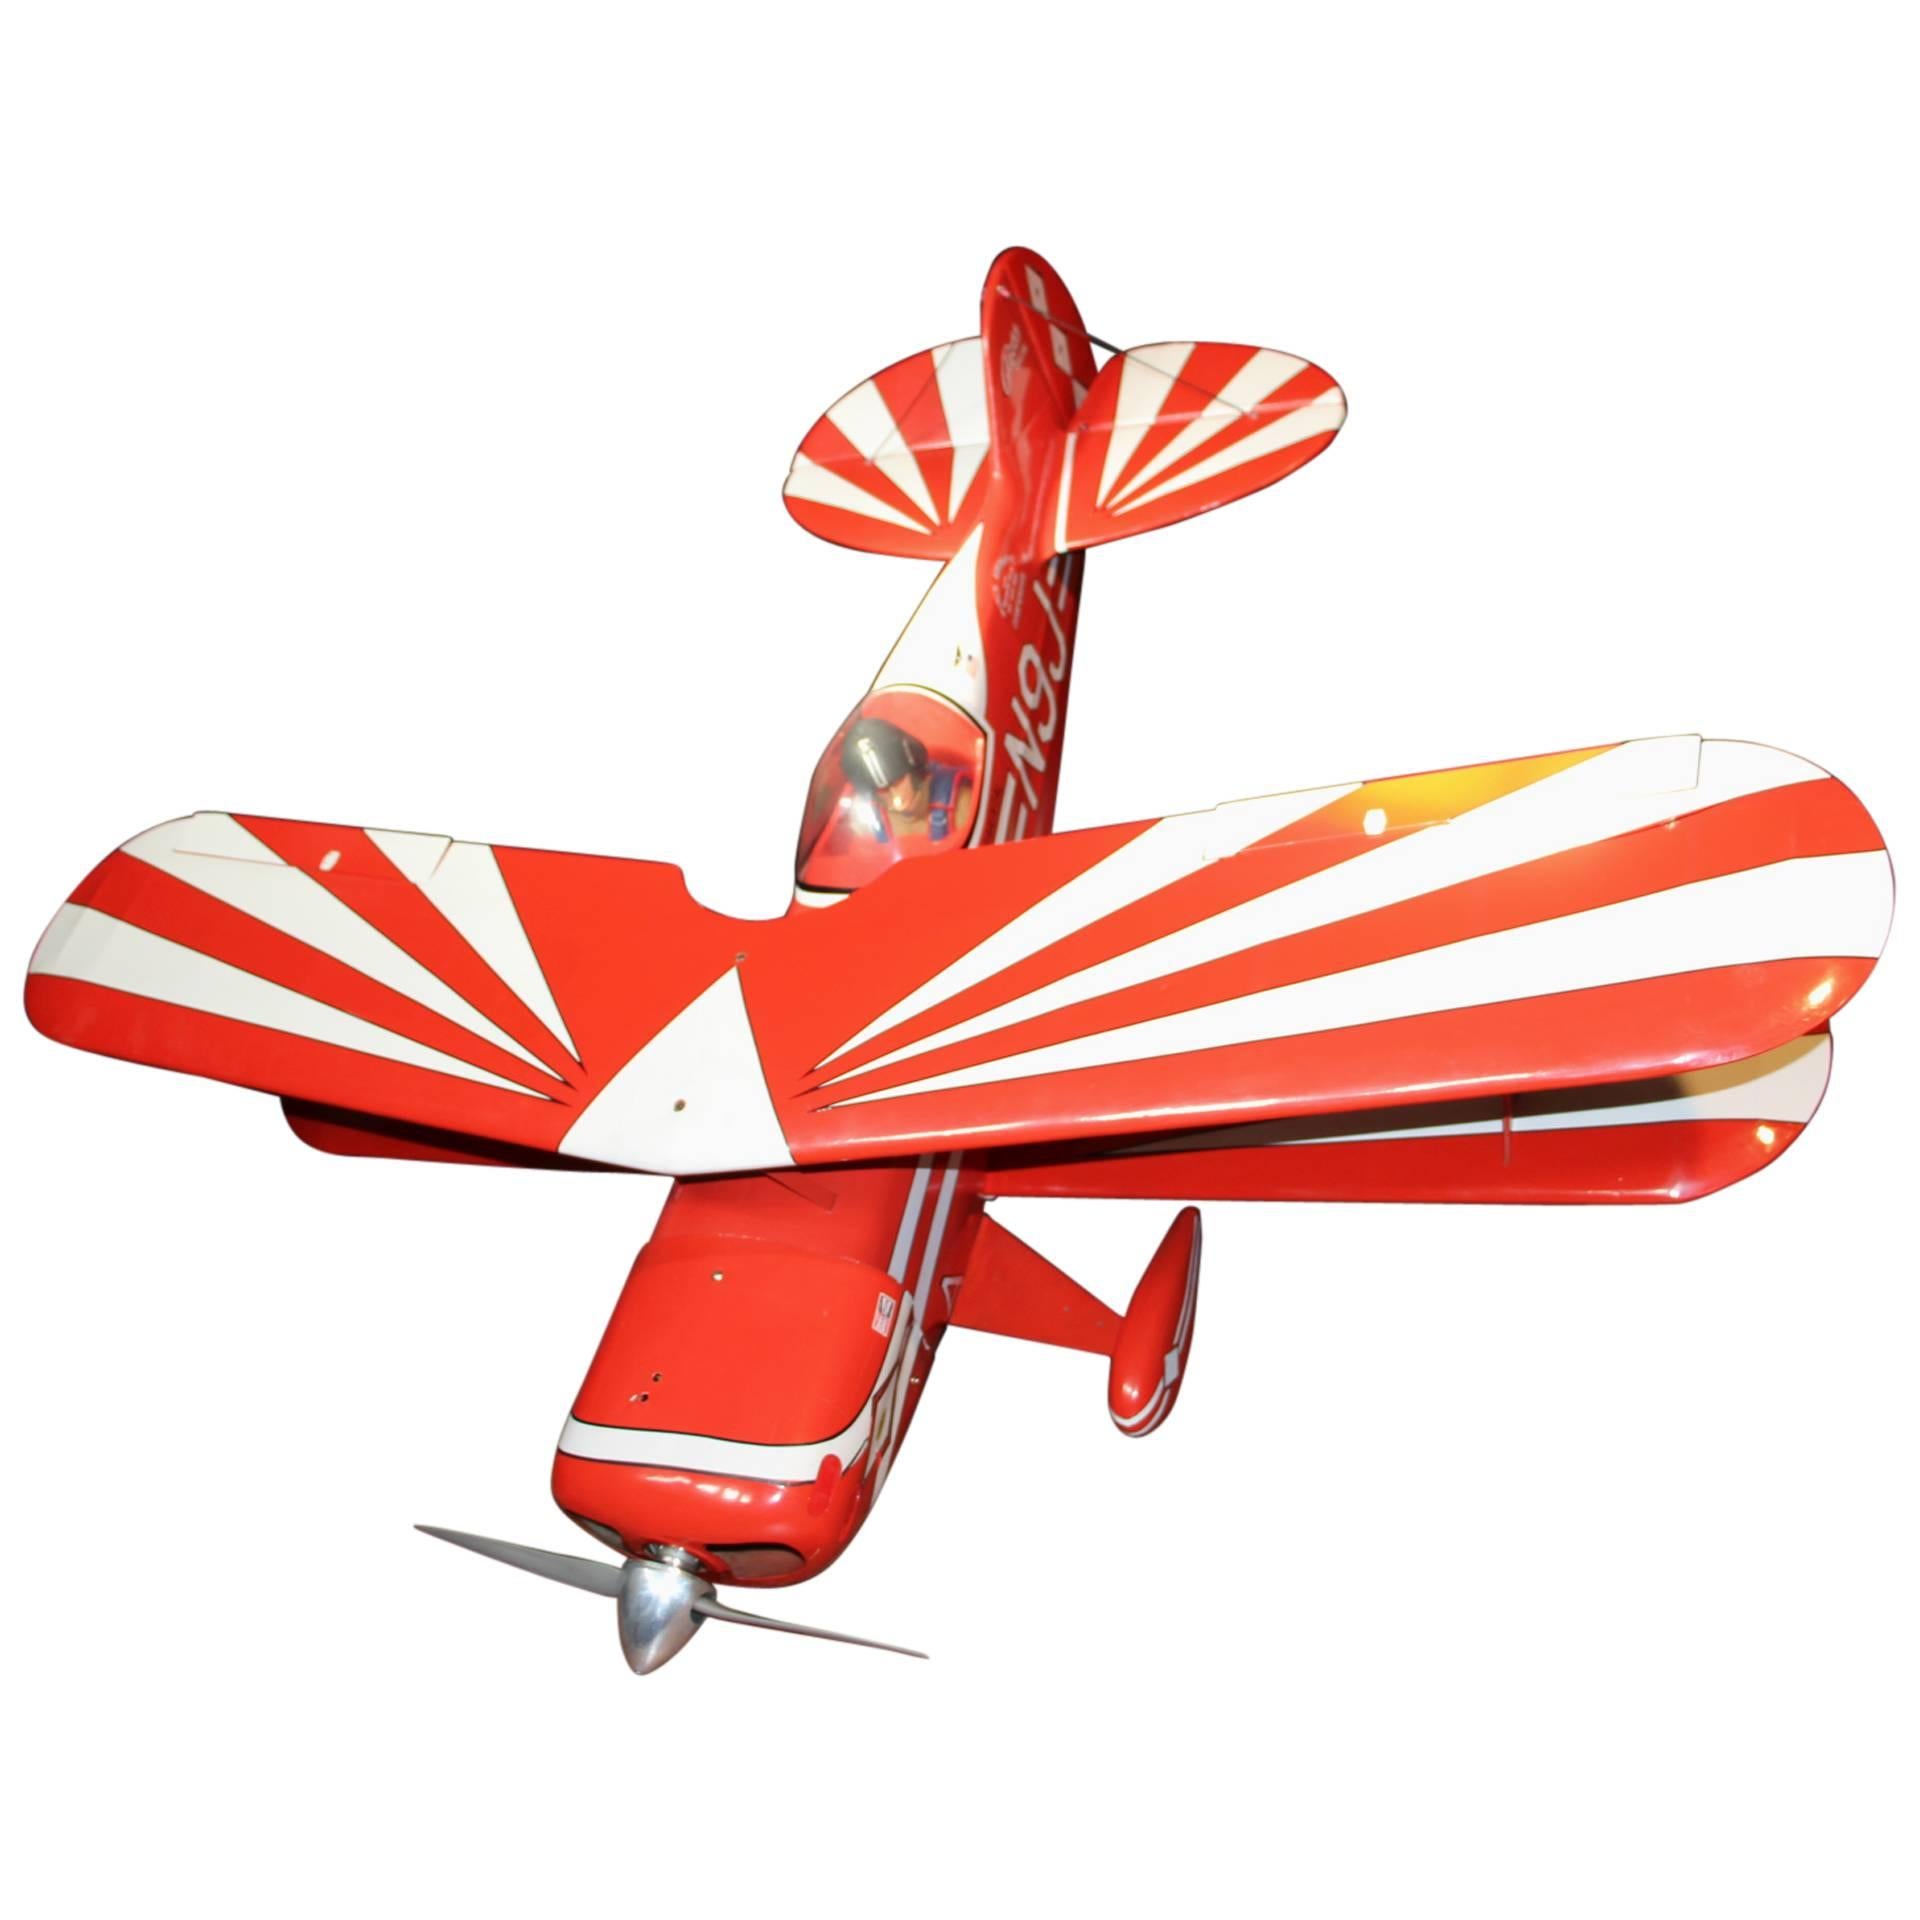 Pitts Airplane Model